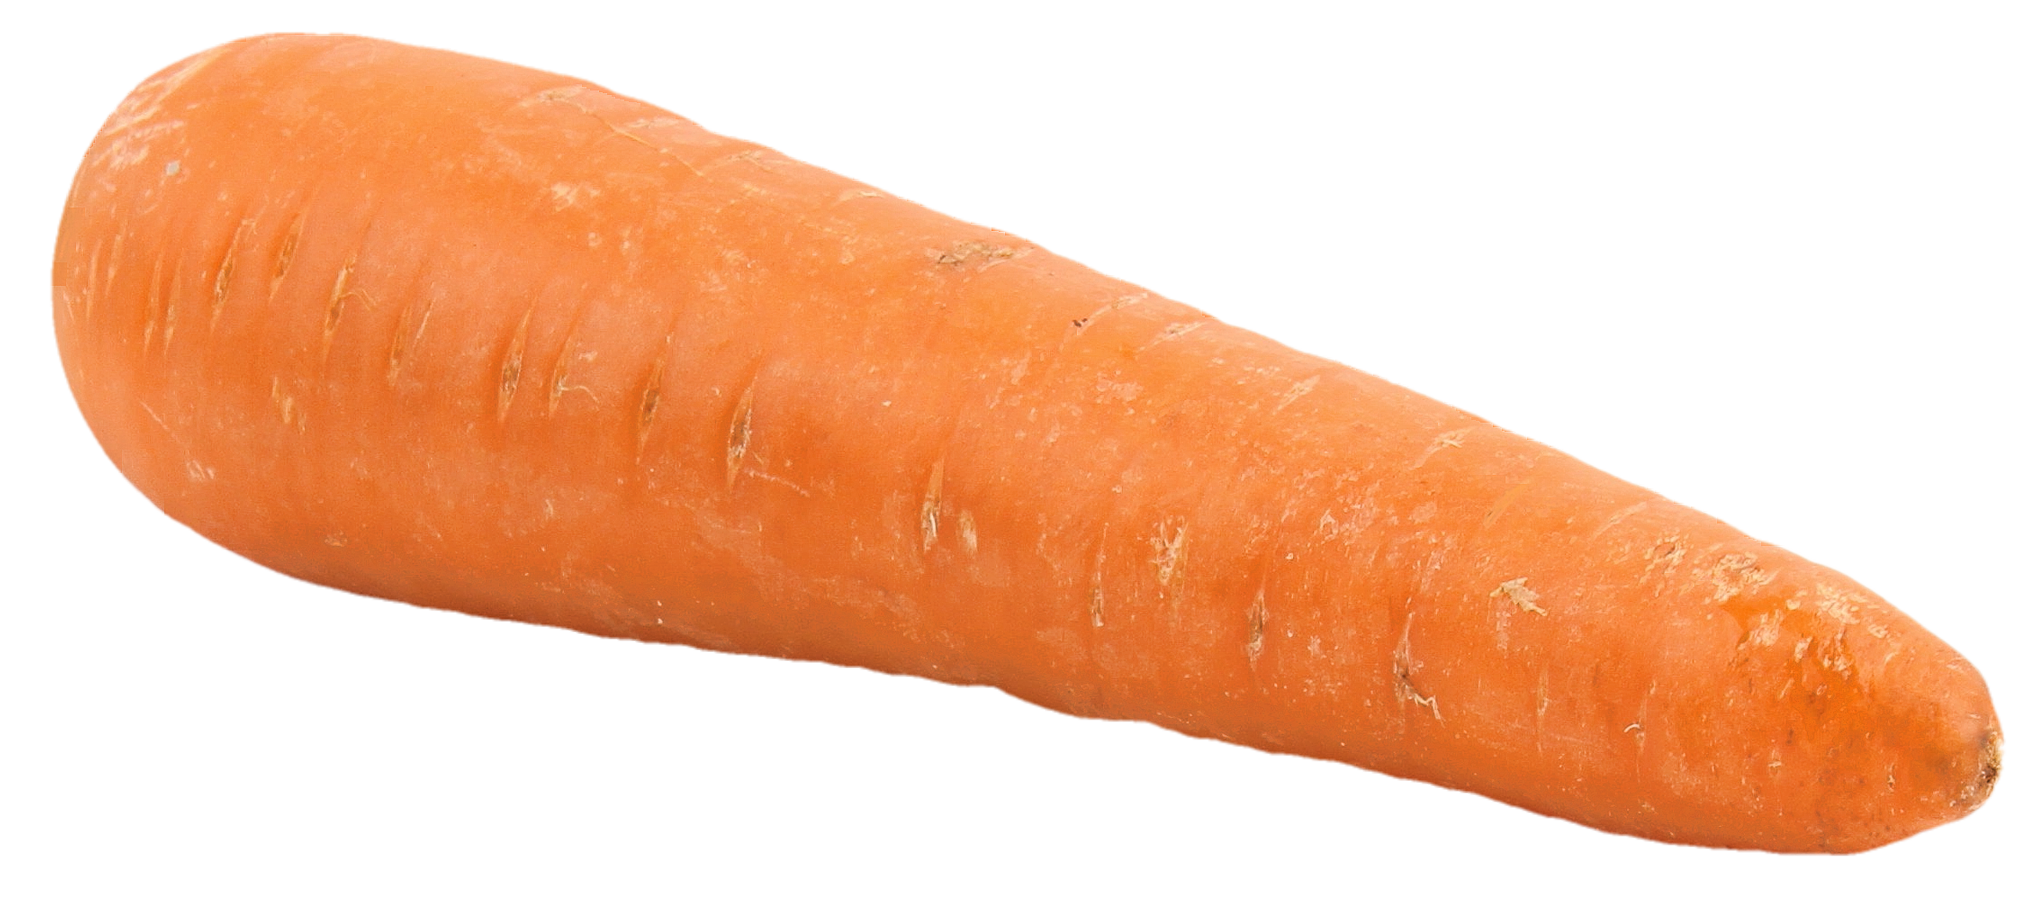 Carrot PNG - 19915